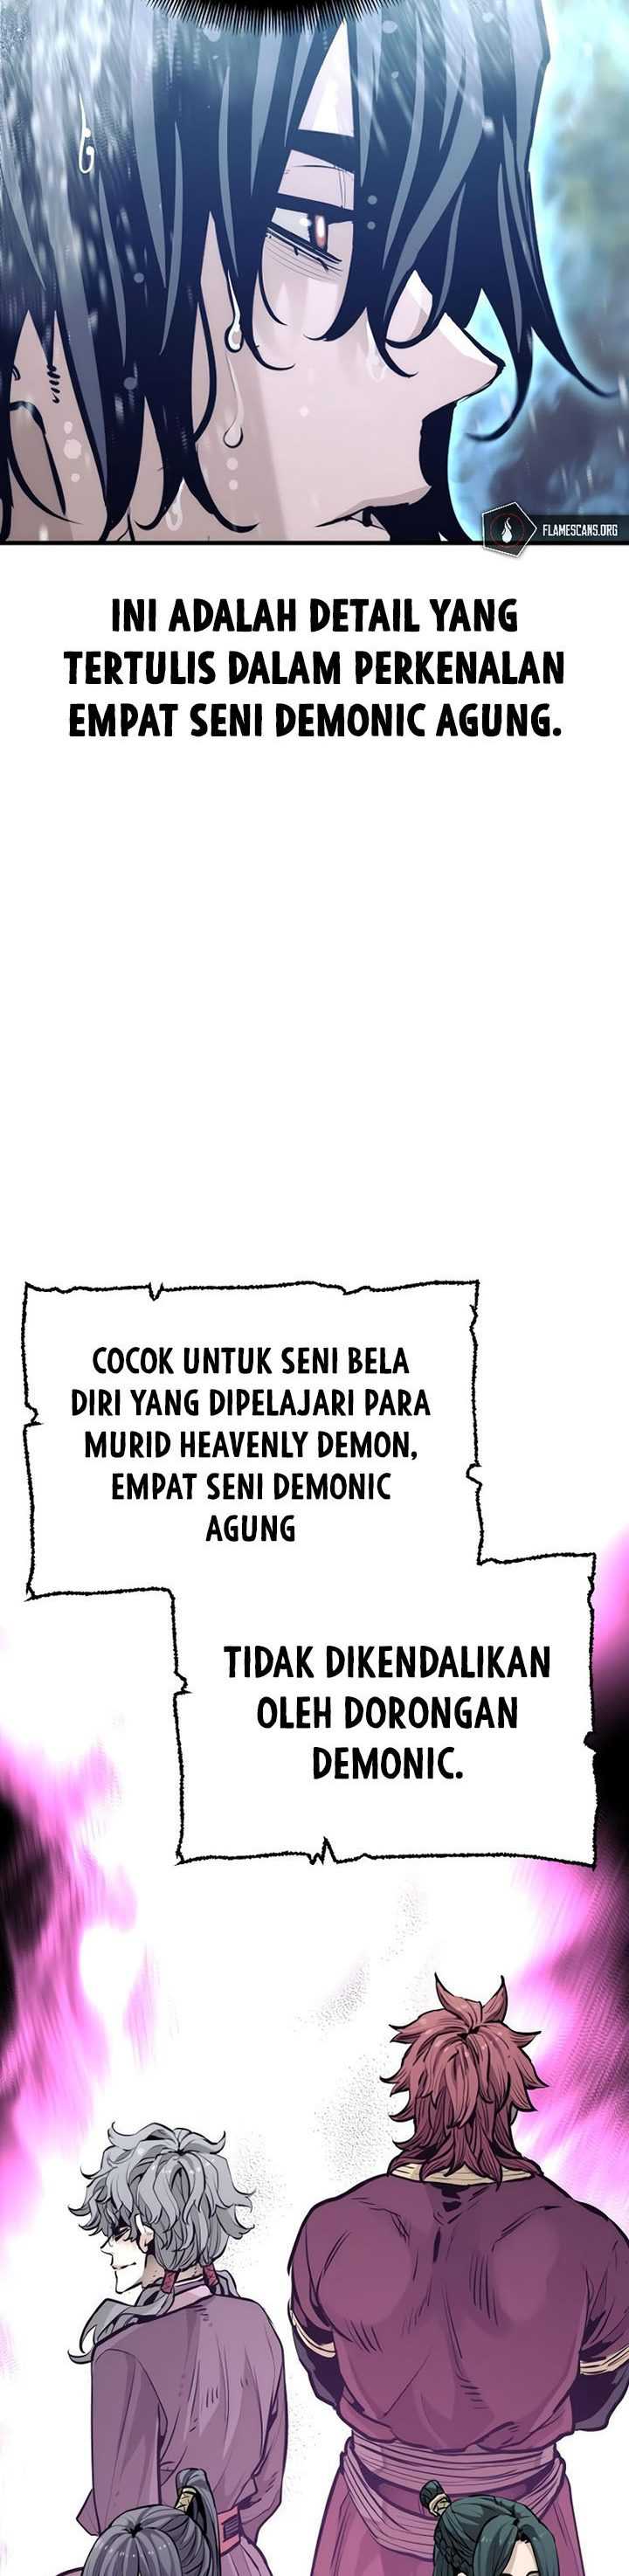 Heavenly Demon Cultivation Simulation Chapter 82 - 517